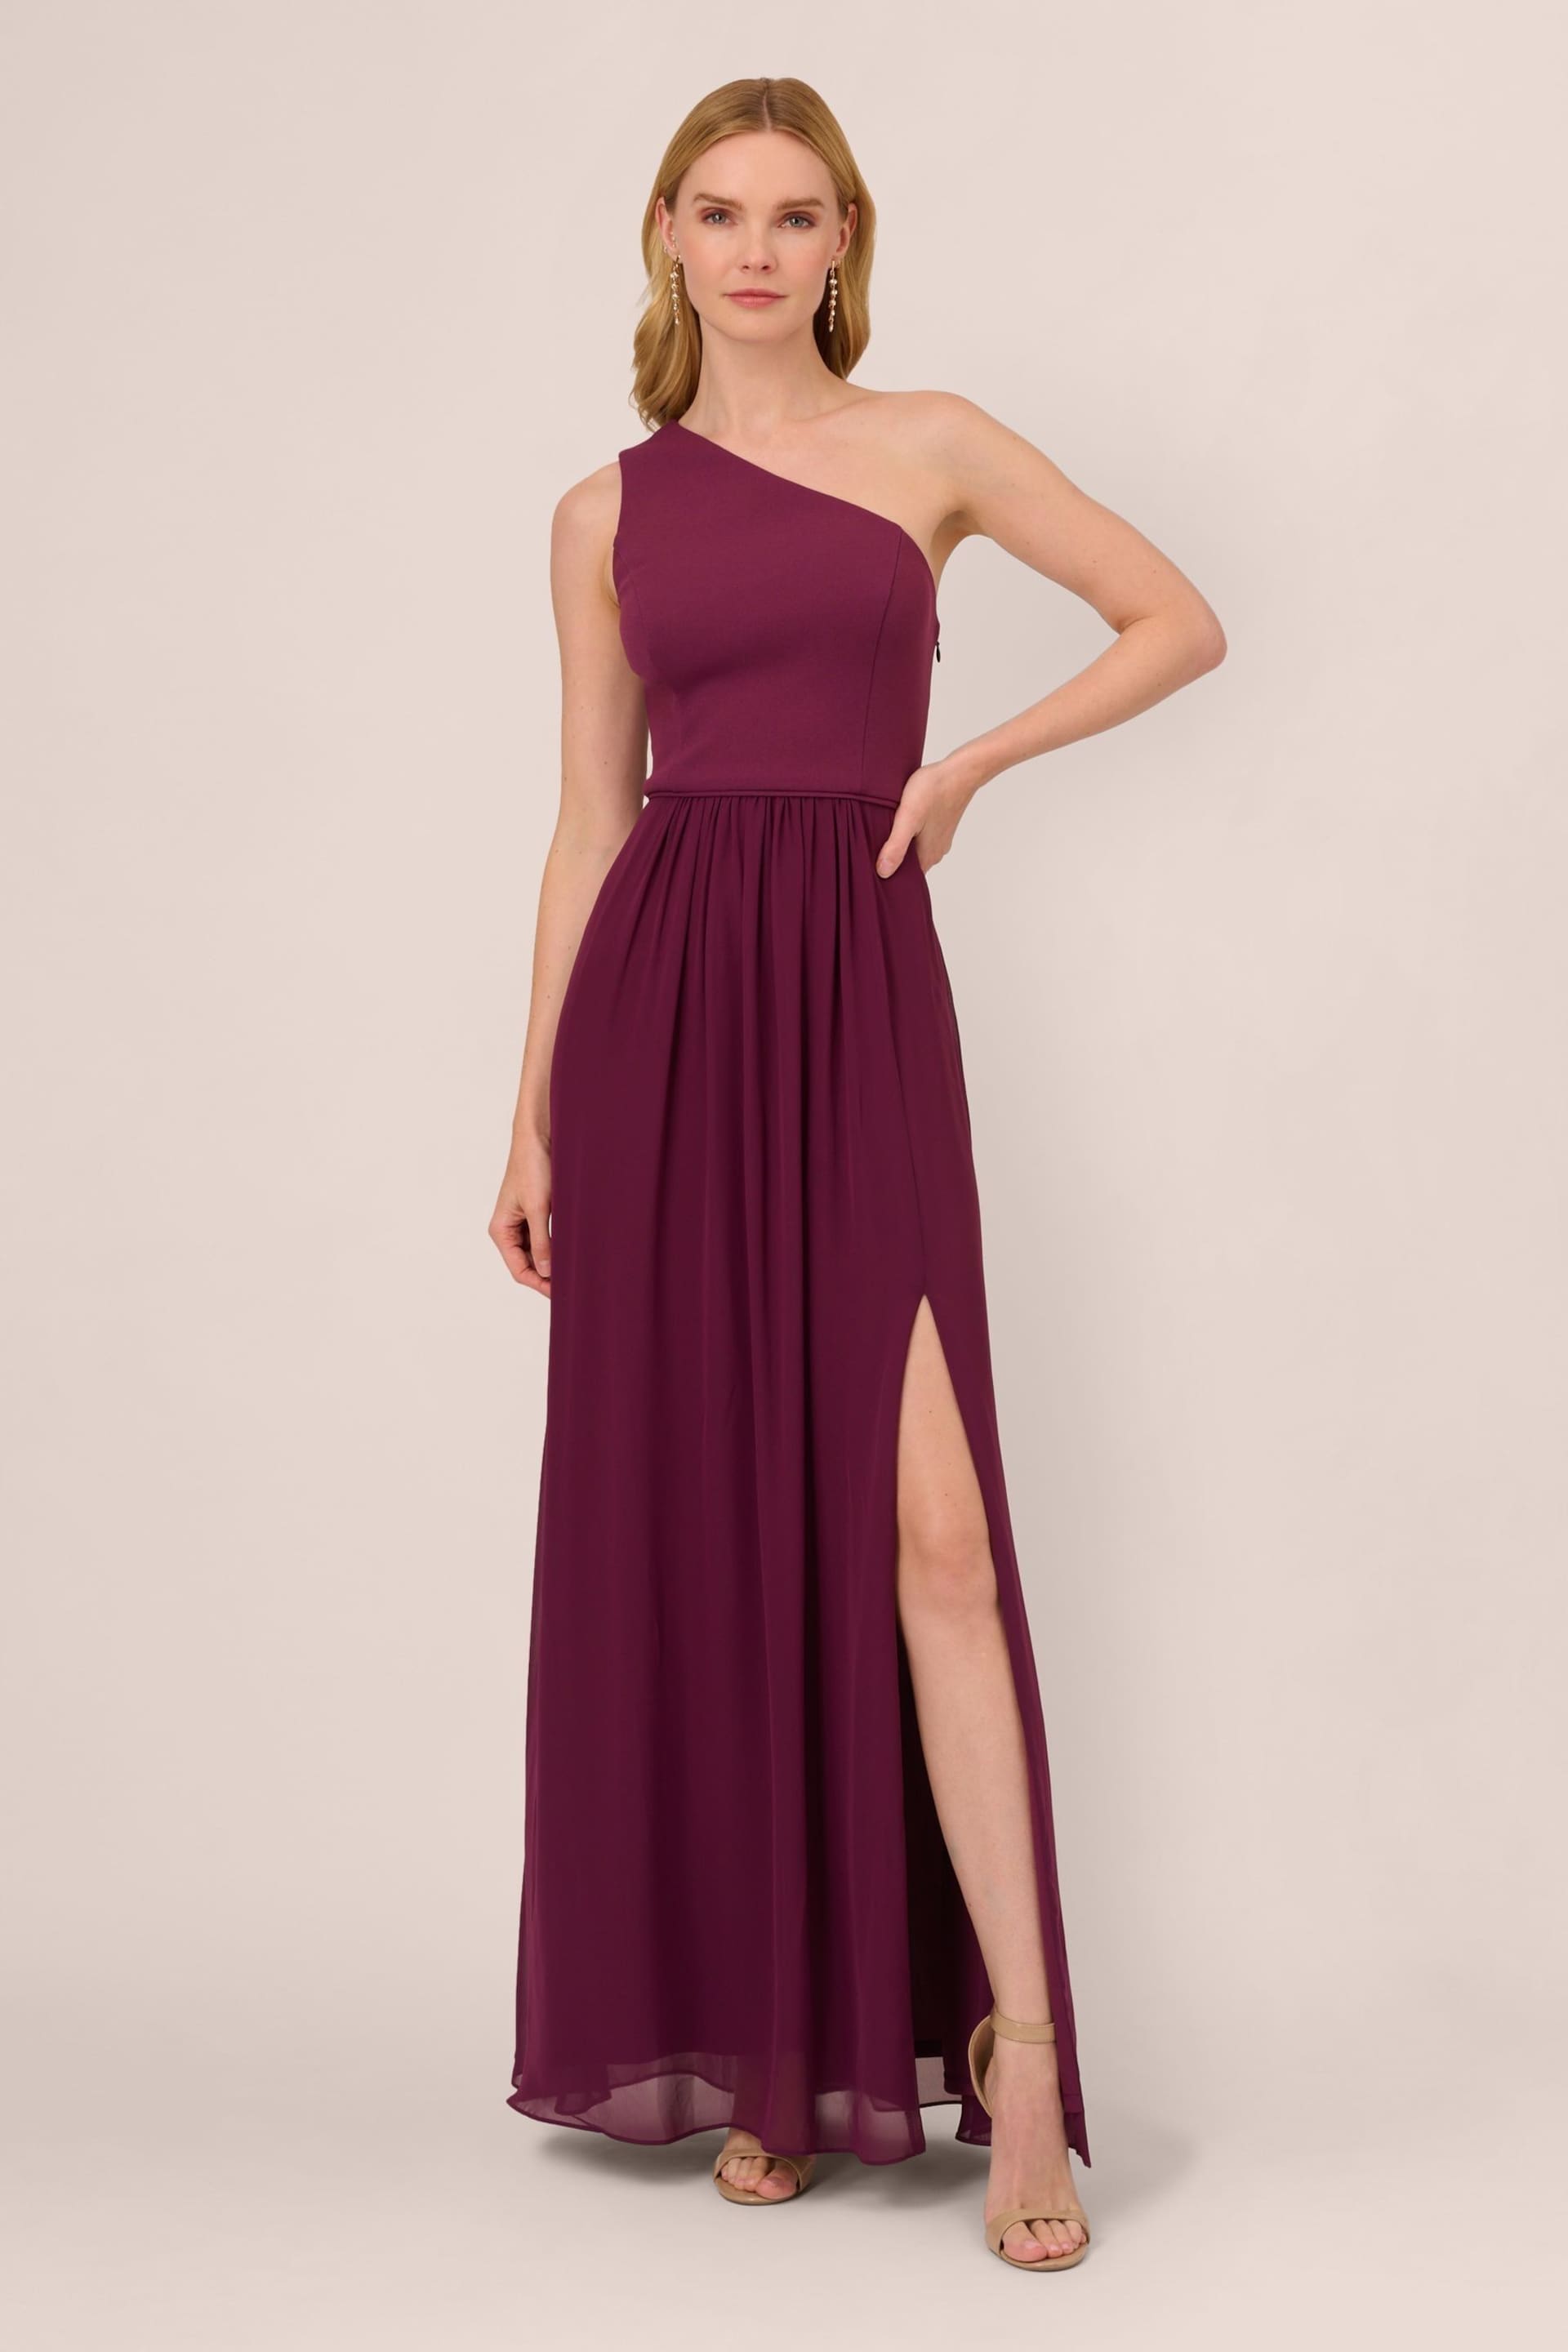 Adrianna Papell One Shoulder Chiffon Gown - Image 1 of 7